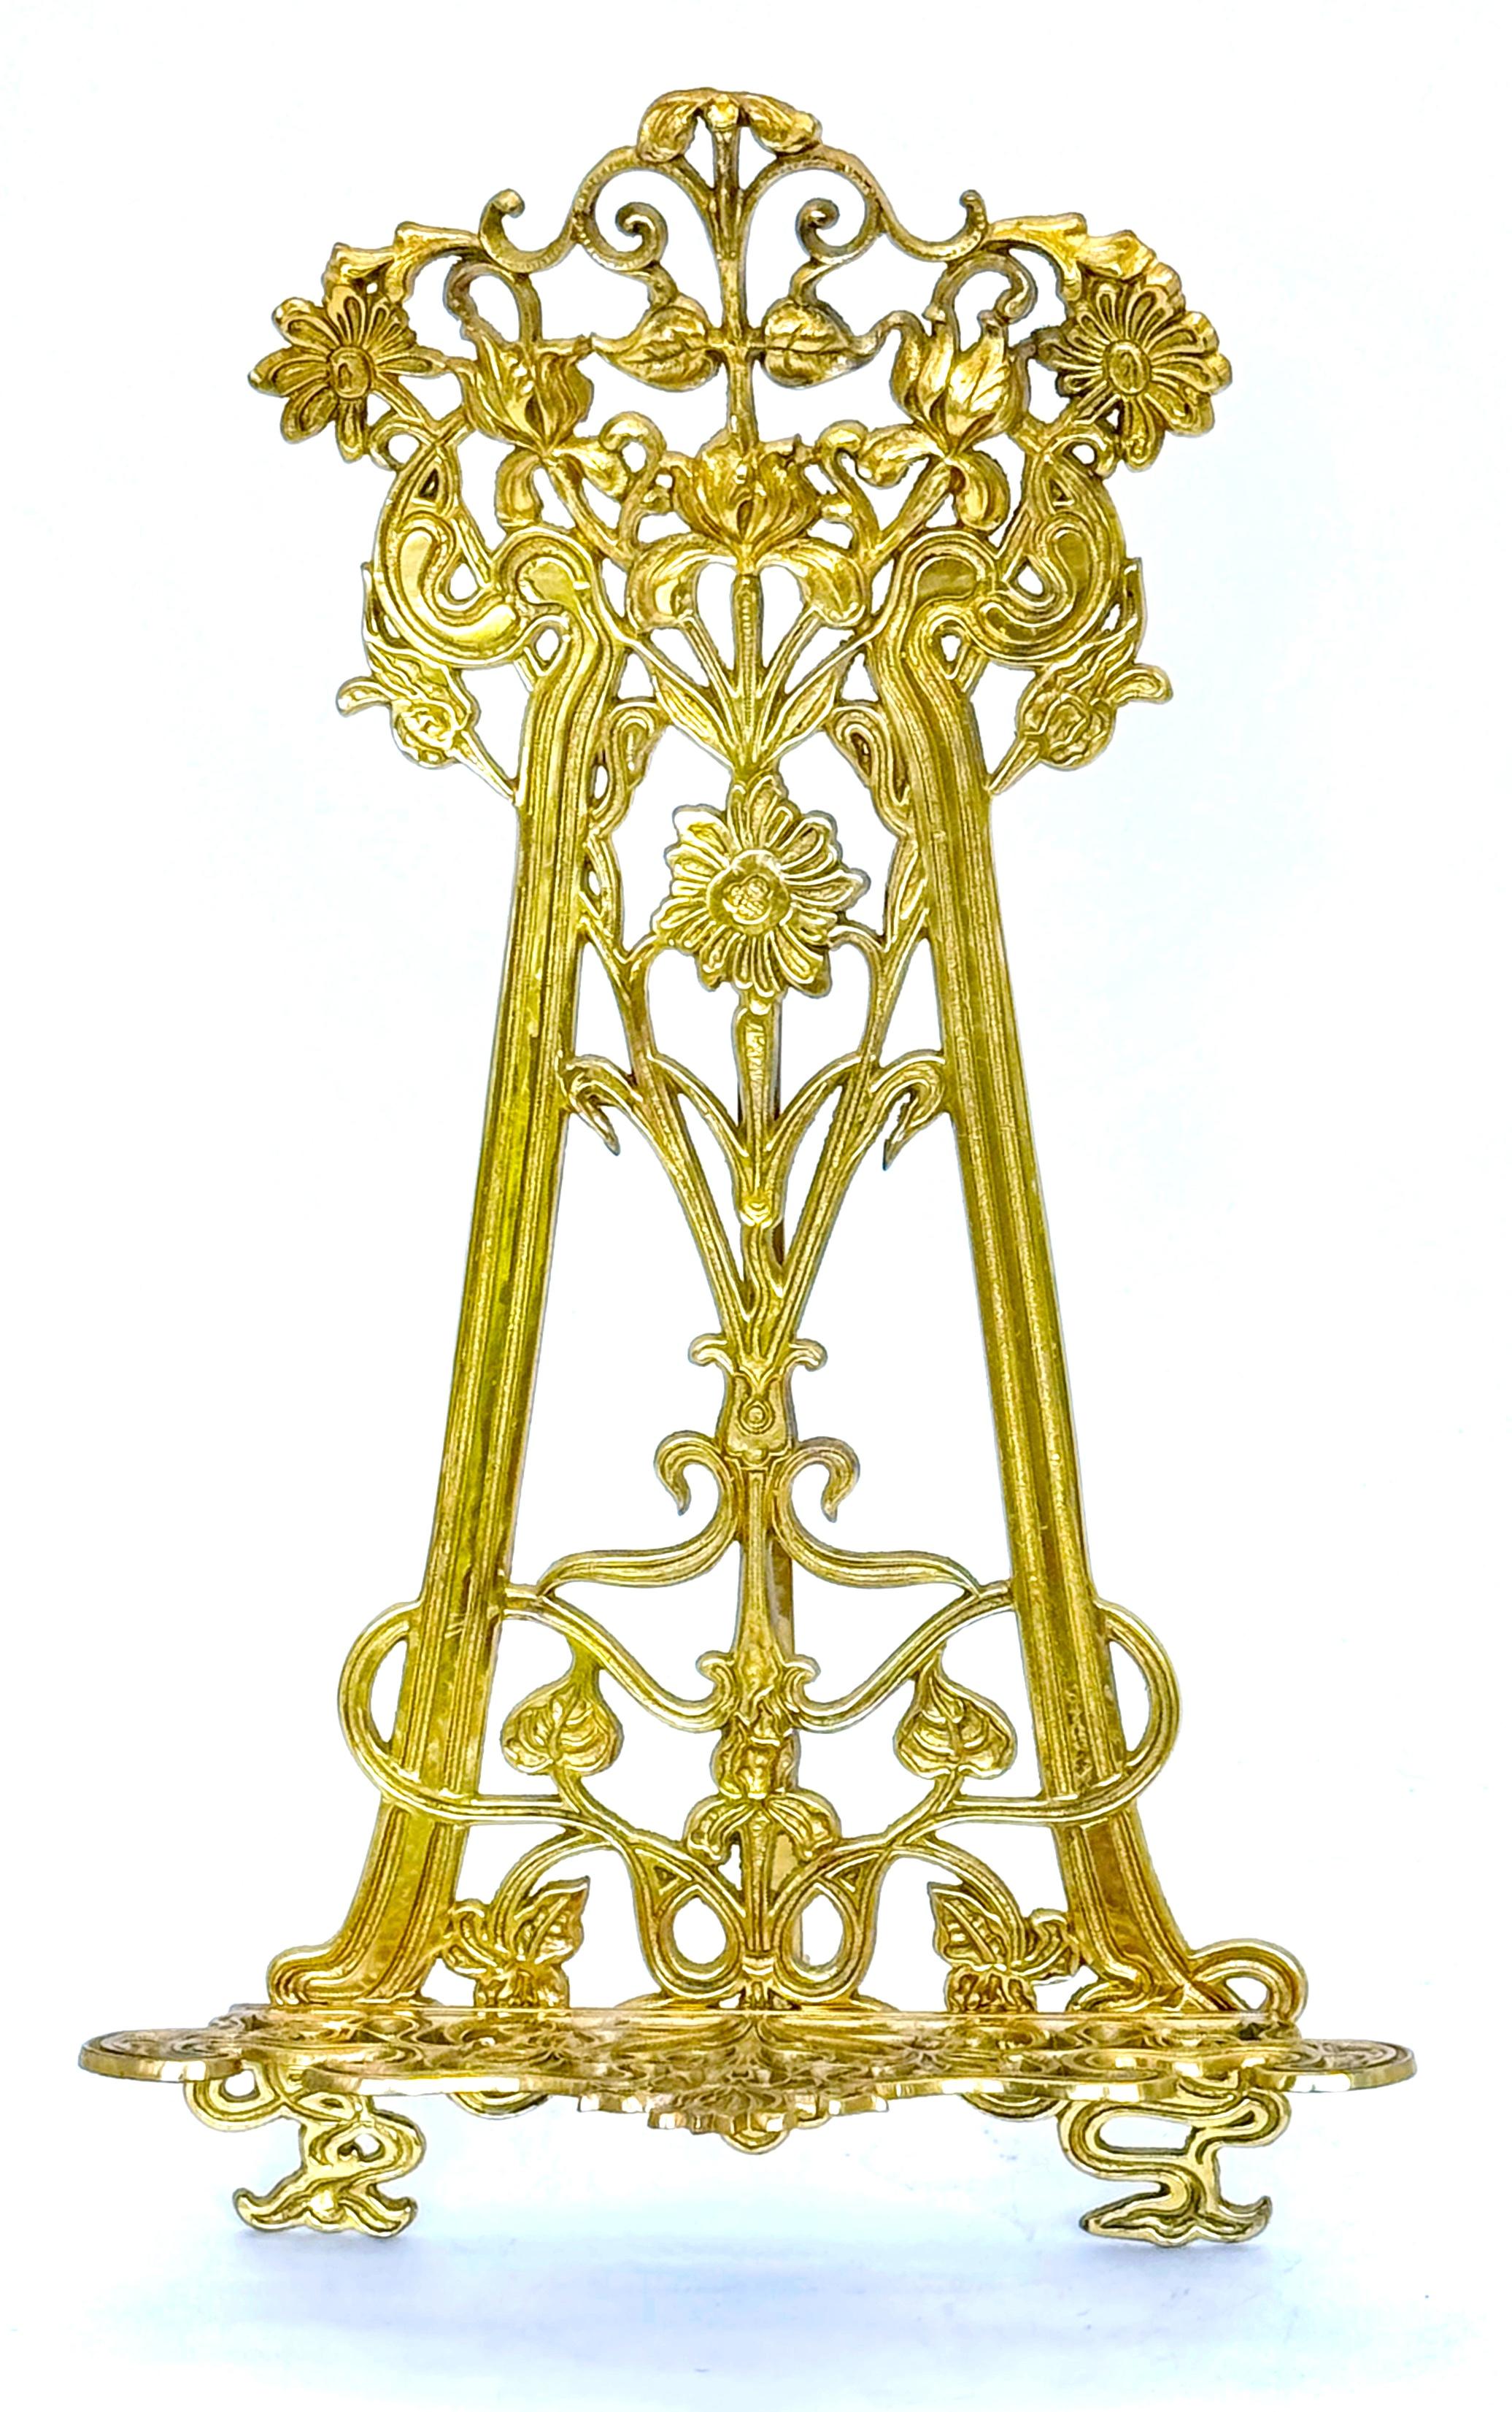 English Art Nouveau Floral Brass Table Bookstand/Easel
England, 20th century 

A magnificent example of English Art Nouveau is this exquisite brass table bookstand/easel. Made in England during the 20th century, it stands as a testament to the